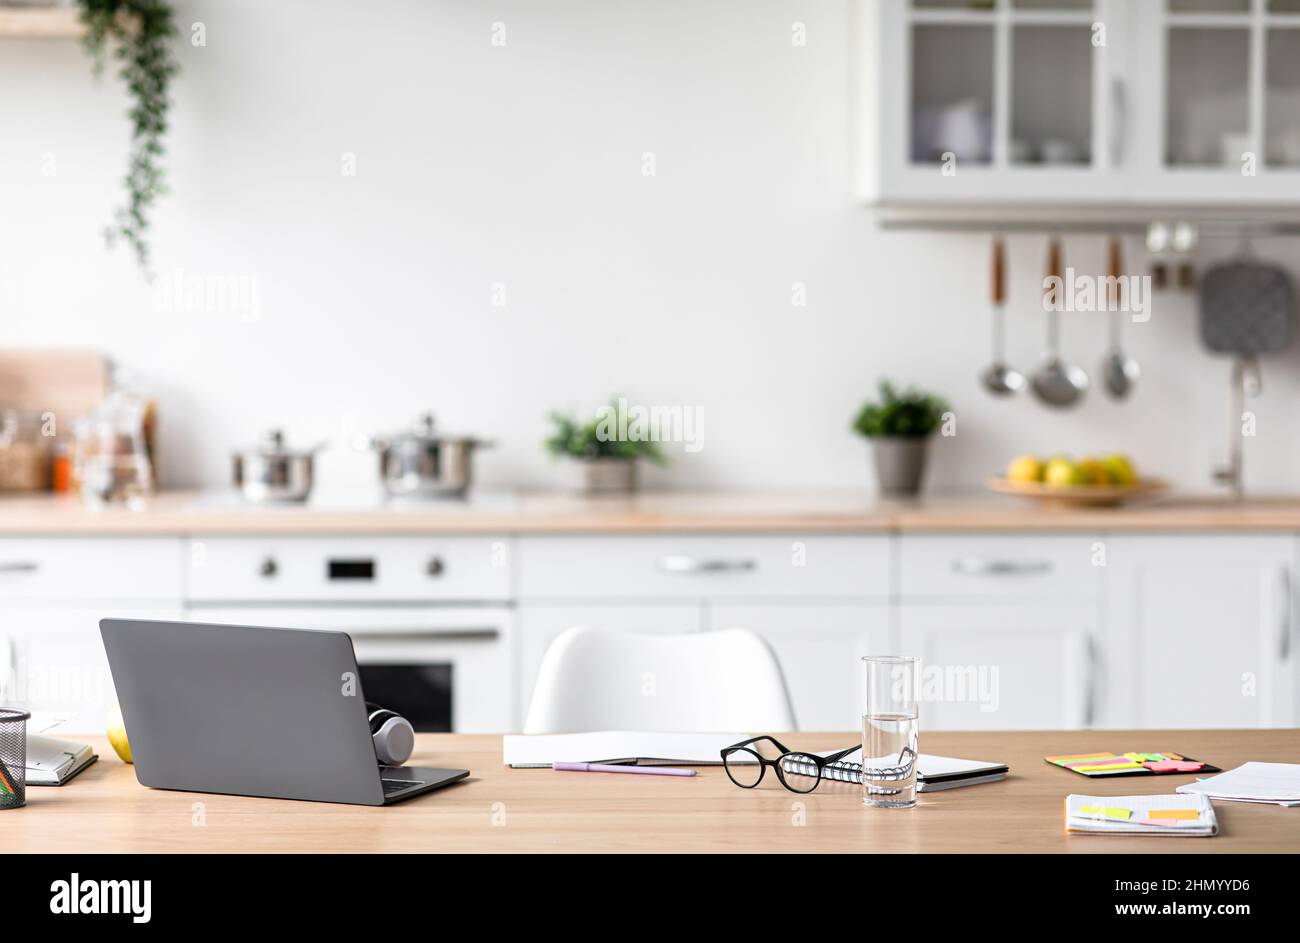 Workplace of student, blogger, manager and businessman, study or work remote in minimalist kitchen interior Stock Photo